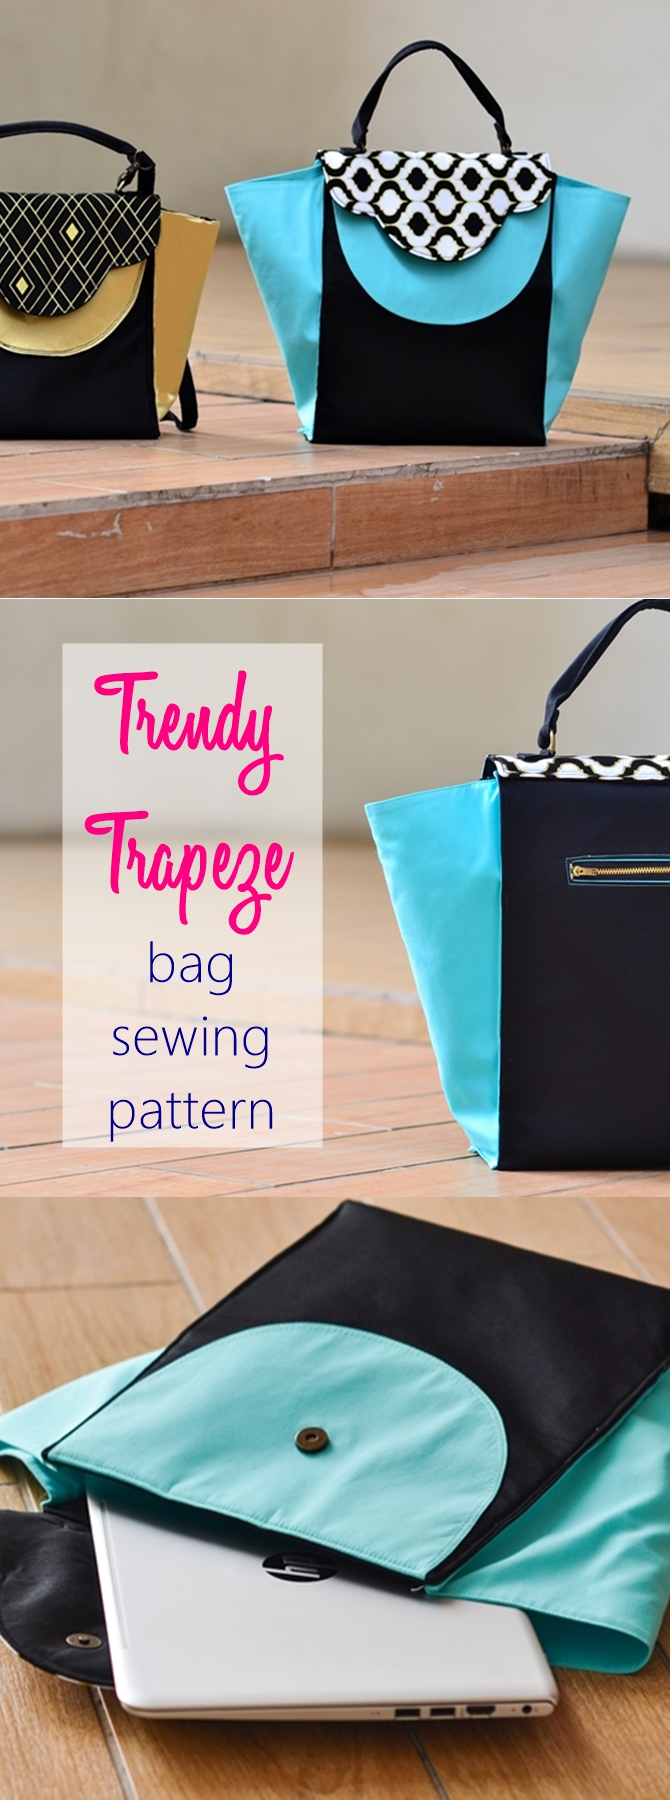 trendy trapeze bag sewing pattern by Sew Some Stuff